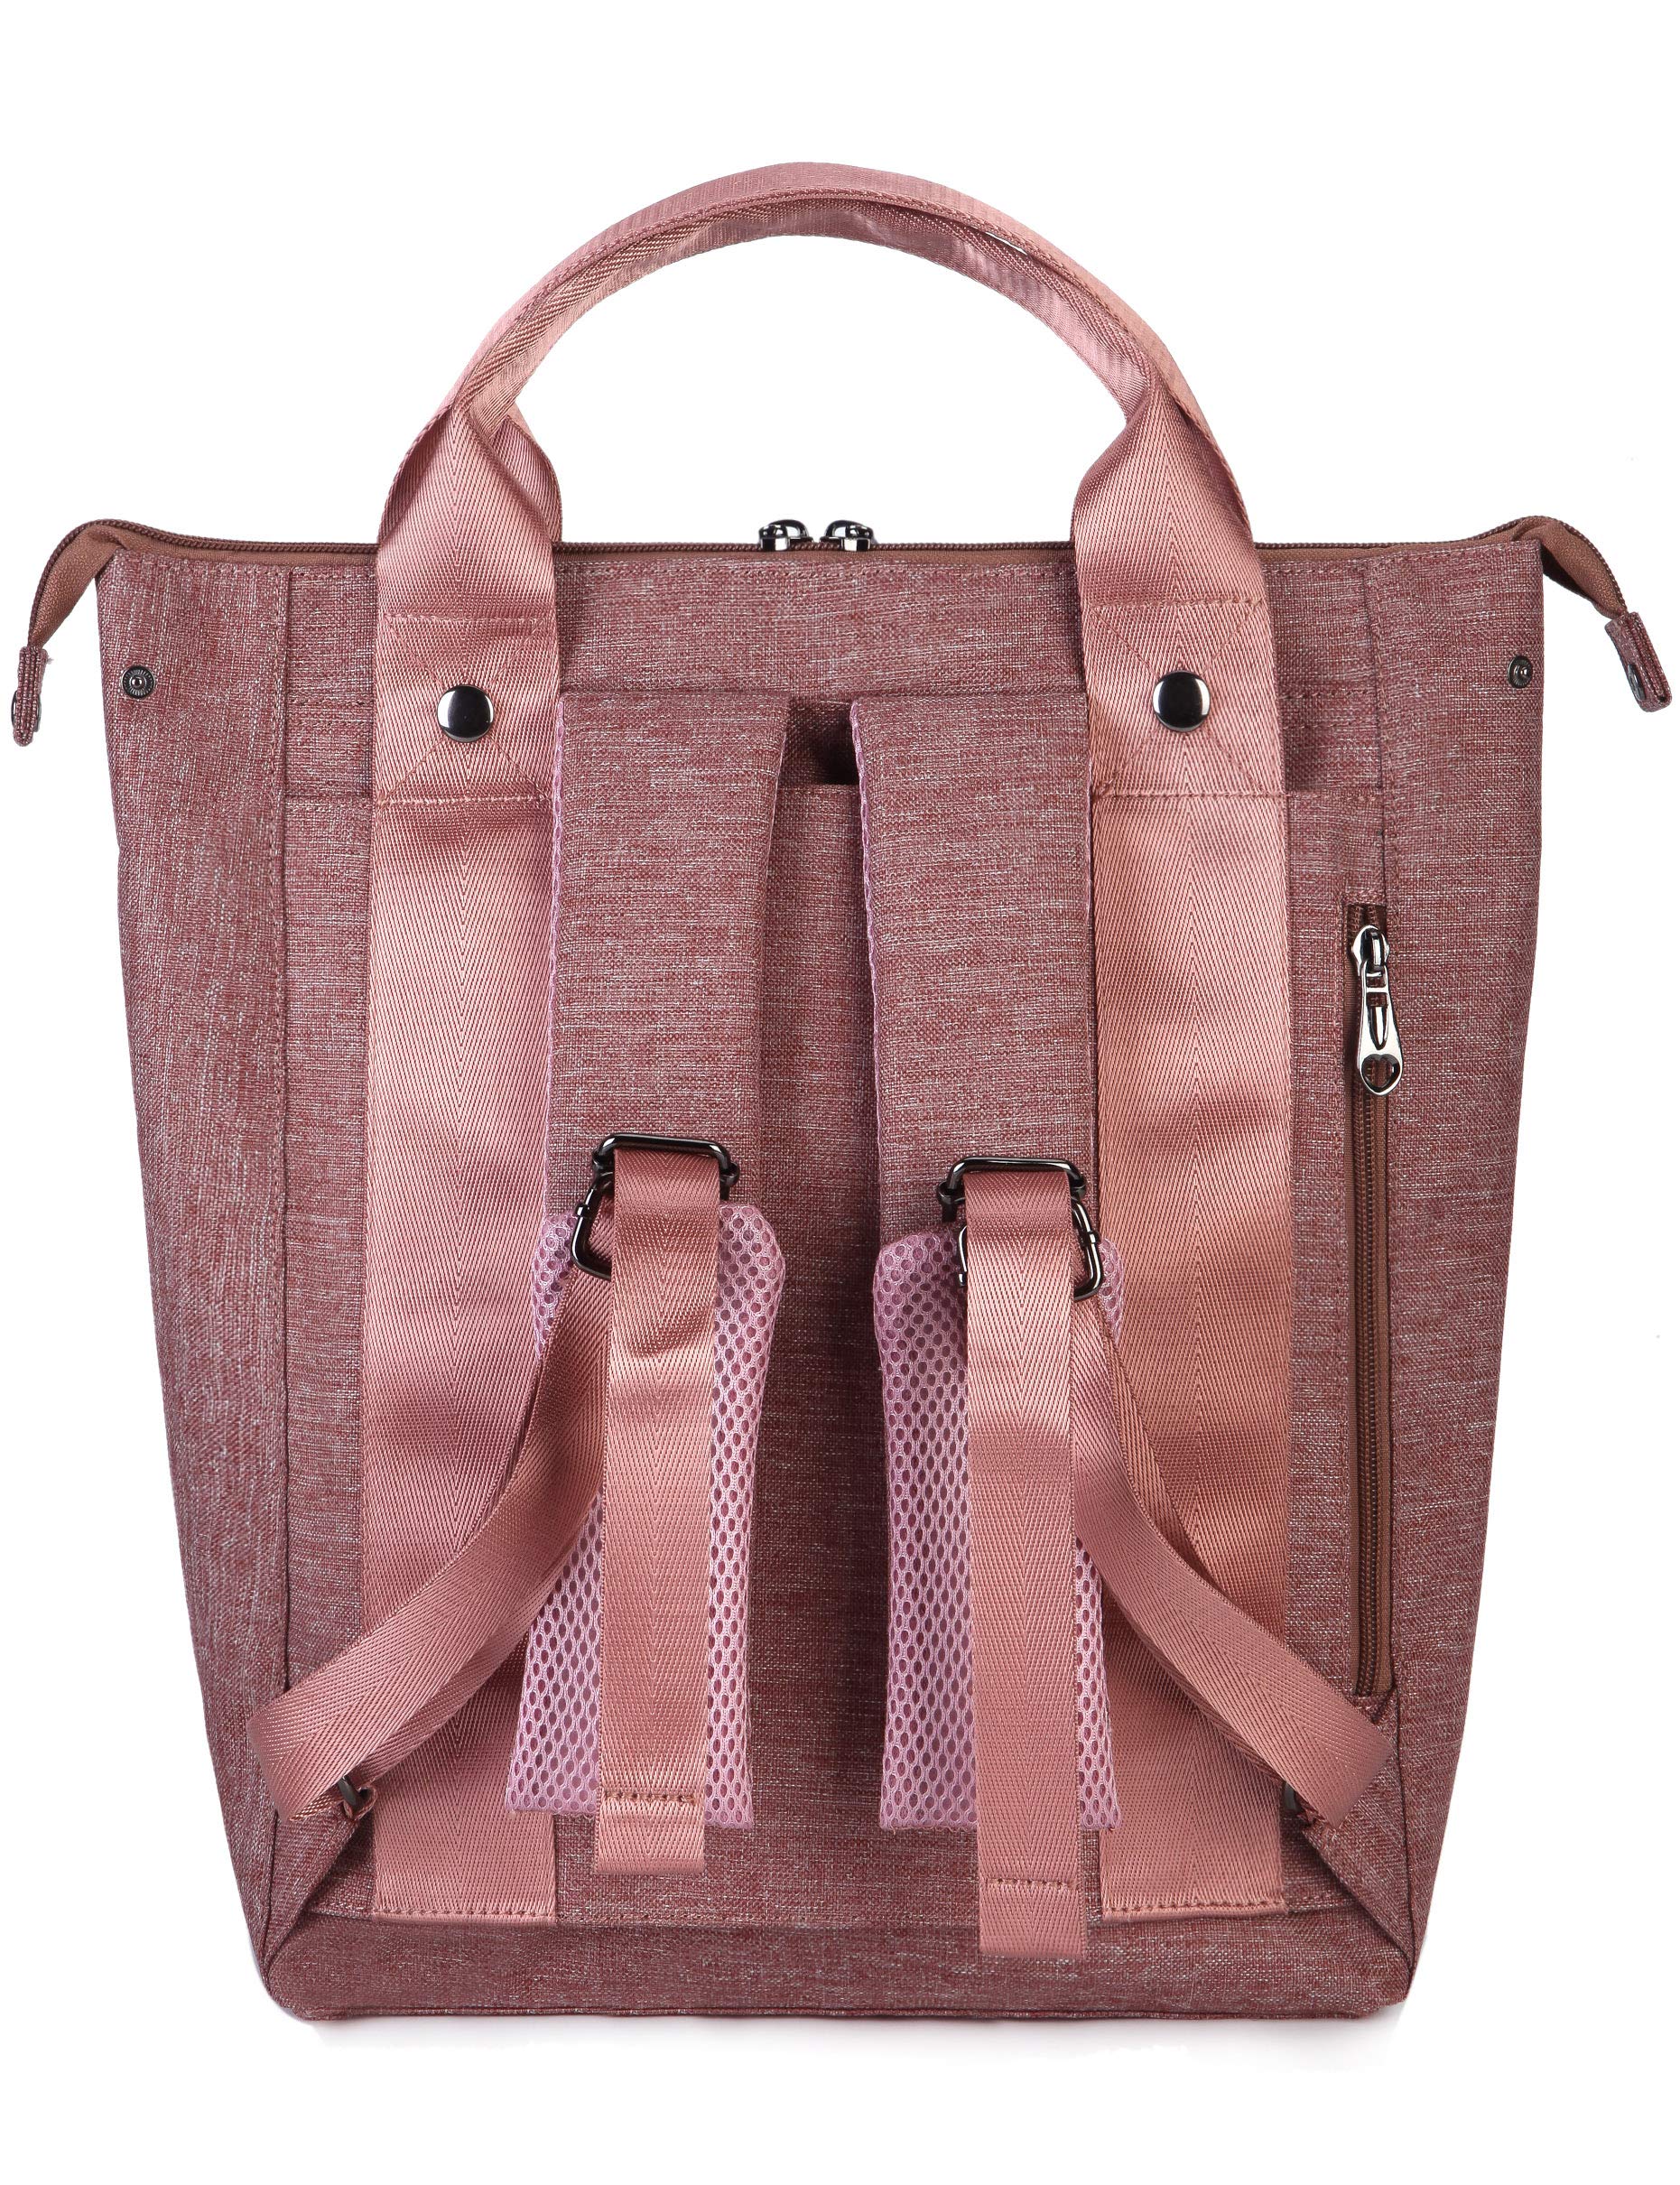 Kah&Kee Convertible Laptop Backpack and Tote Bag Handbag Computer Compartment Travel School for Women Man (Antique Pink)